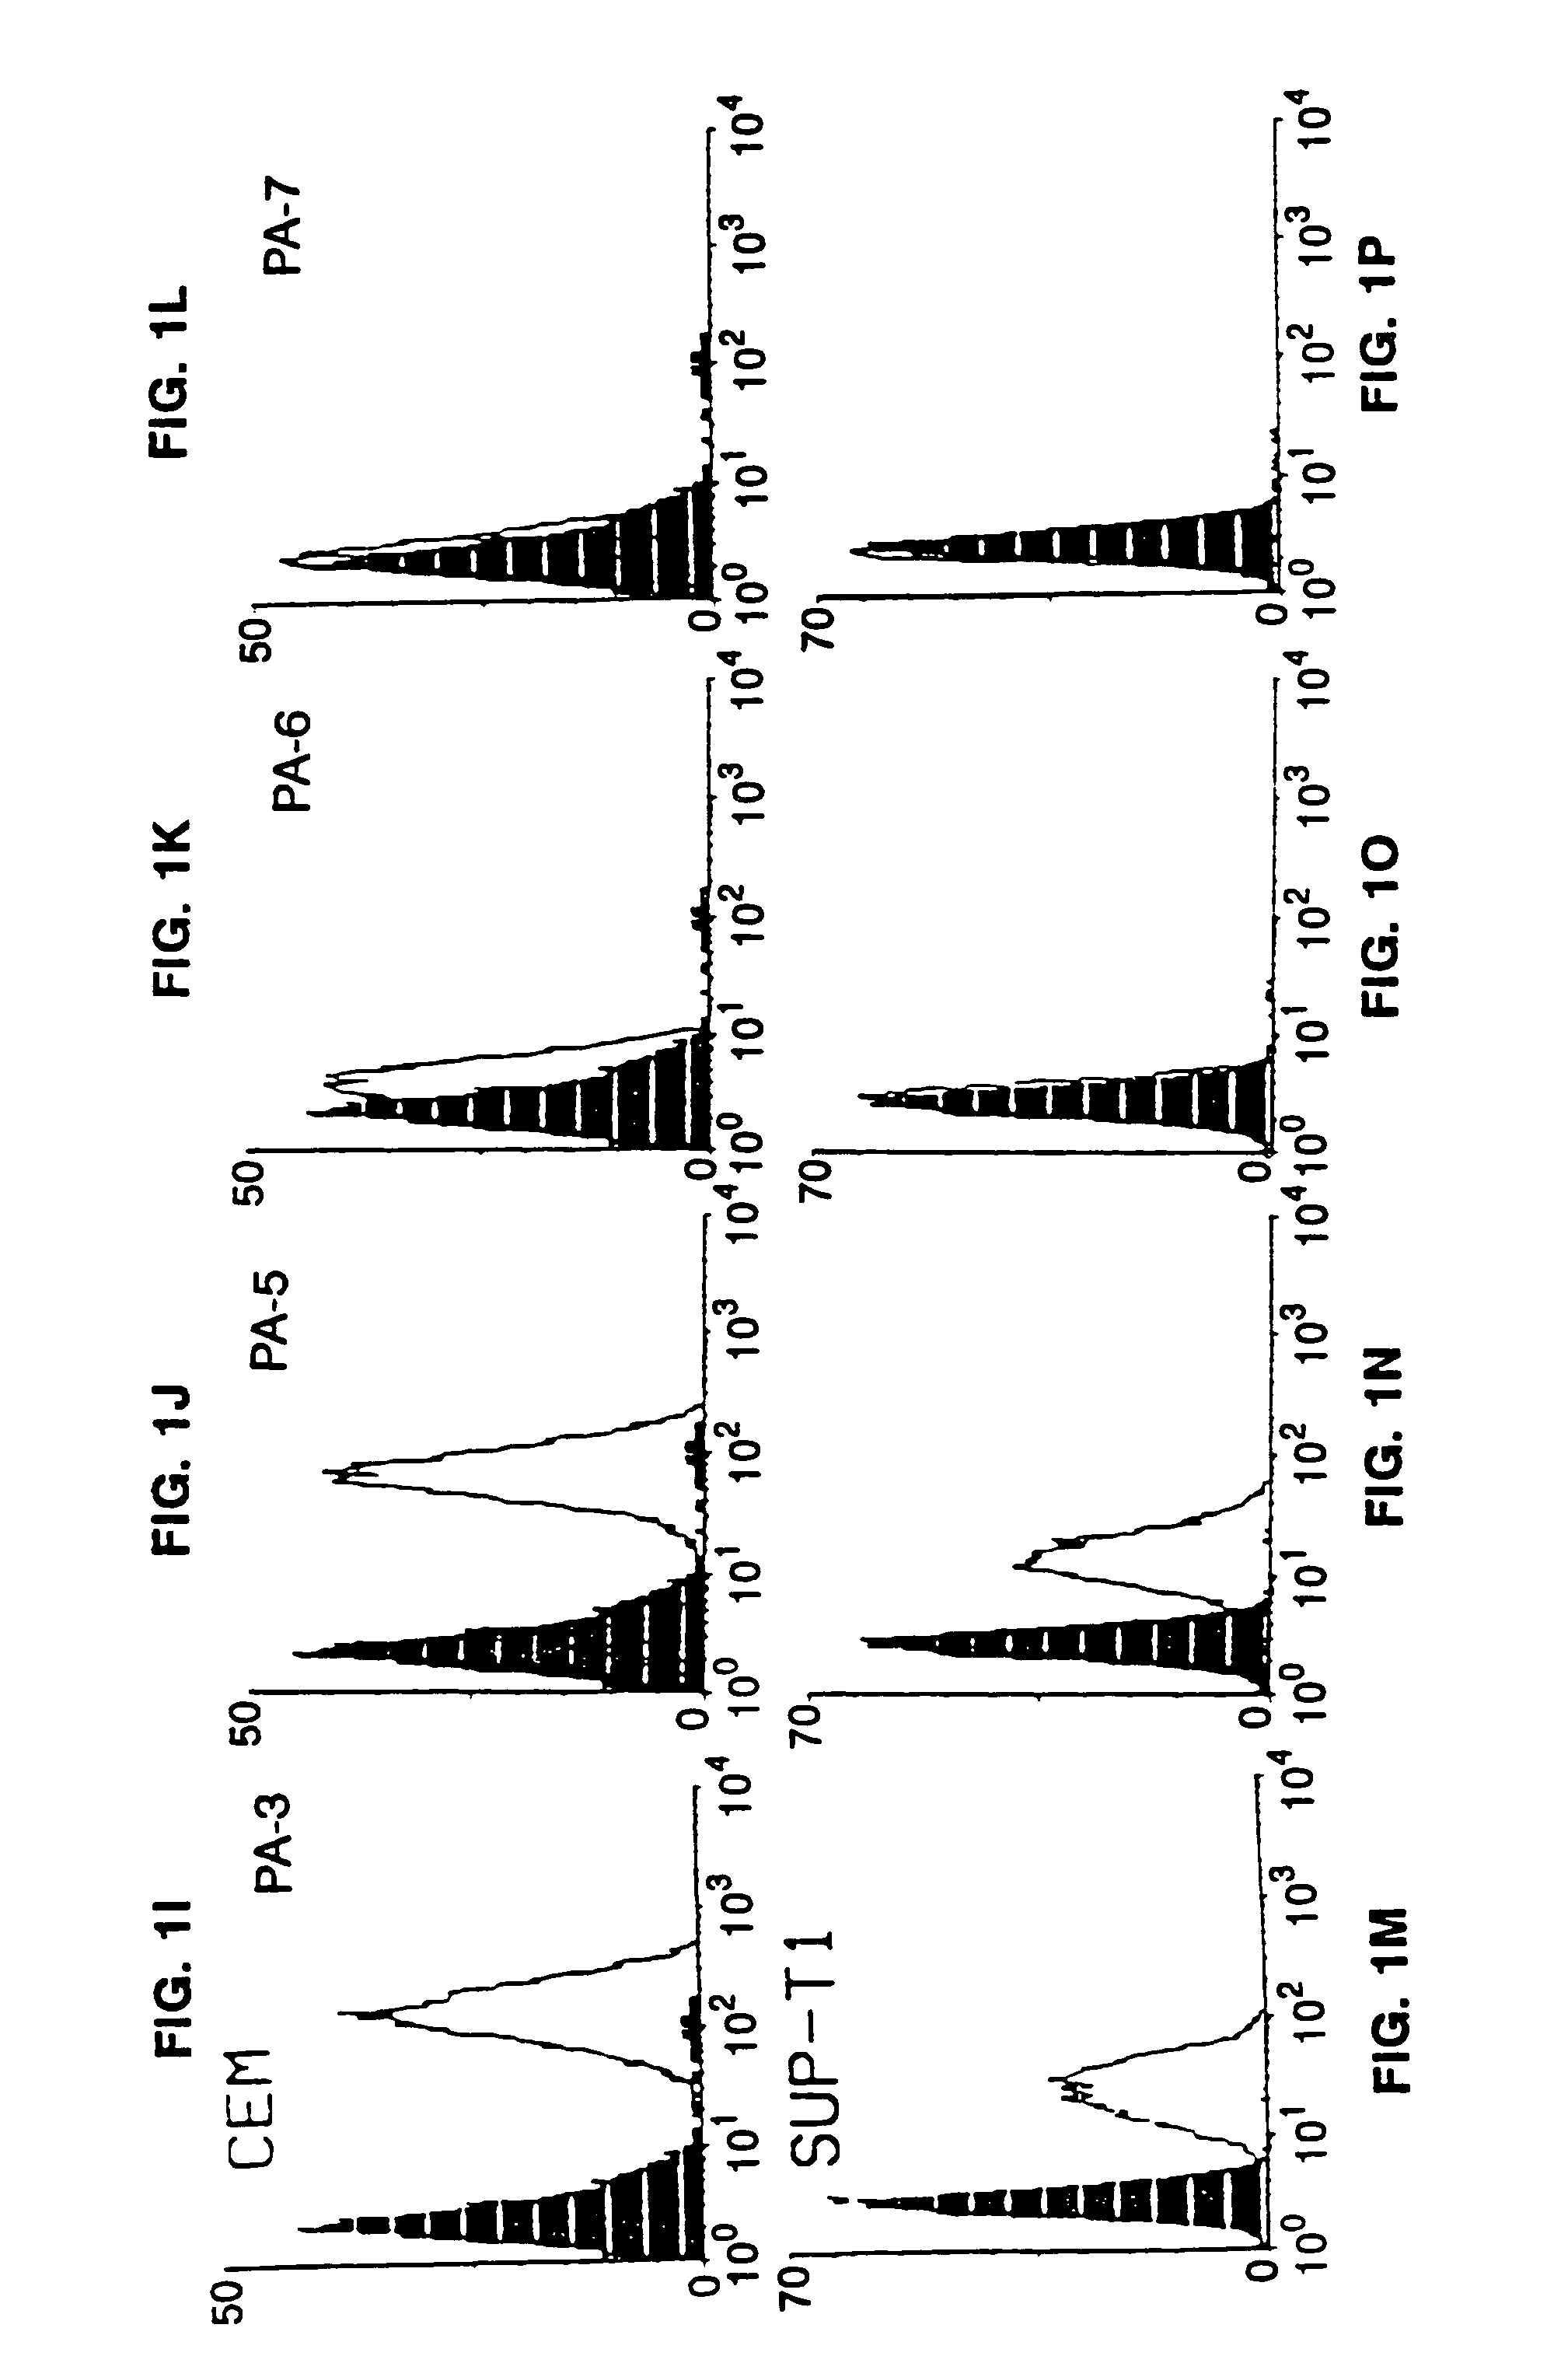 Methods for inhibiting HIV-1 infection